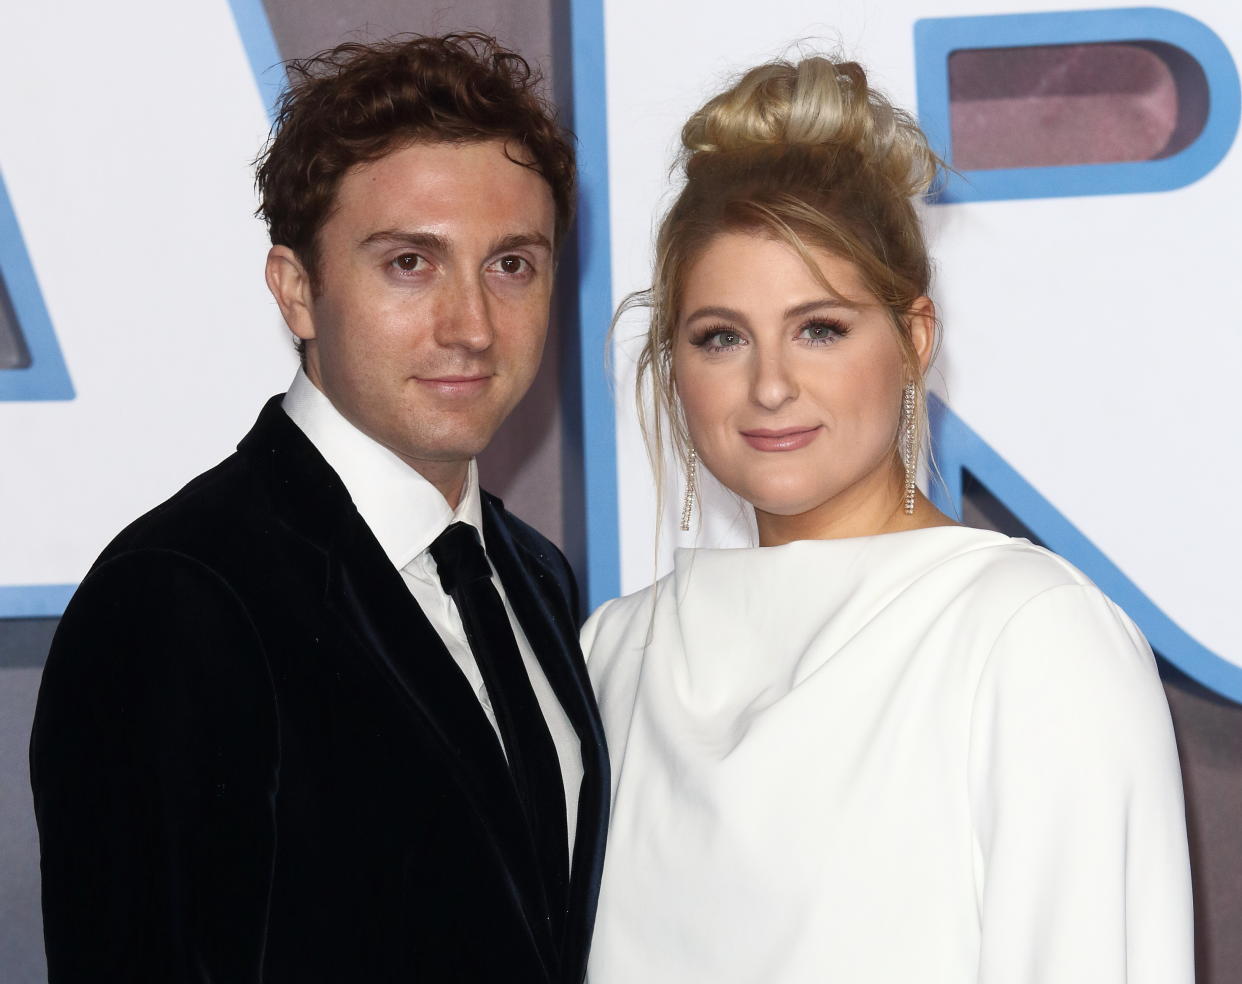 Meghan Trainor reveals the moment that she knew actor Daryl Sabara was the one. (Photo: Getty Images)